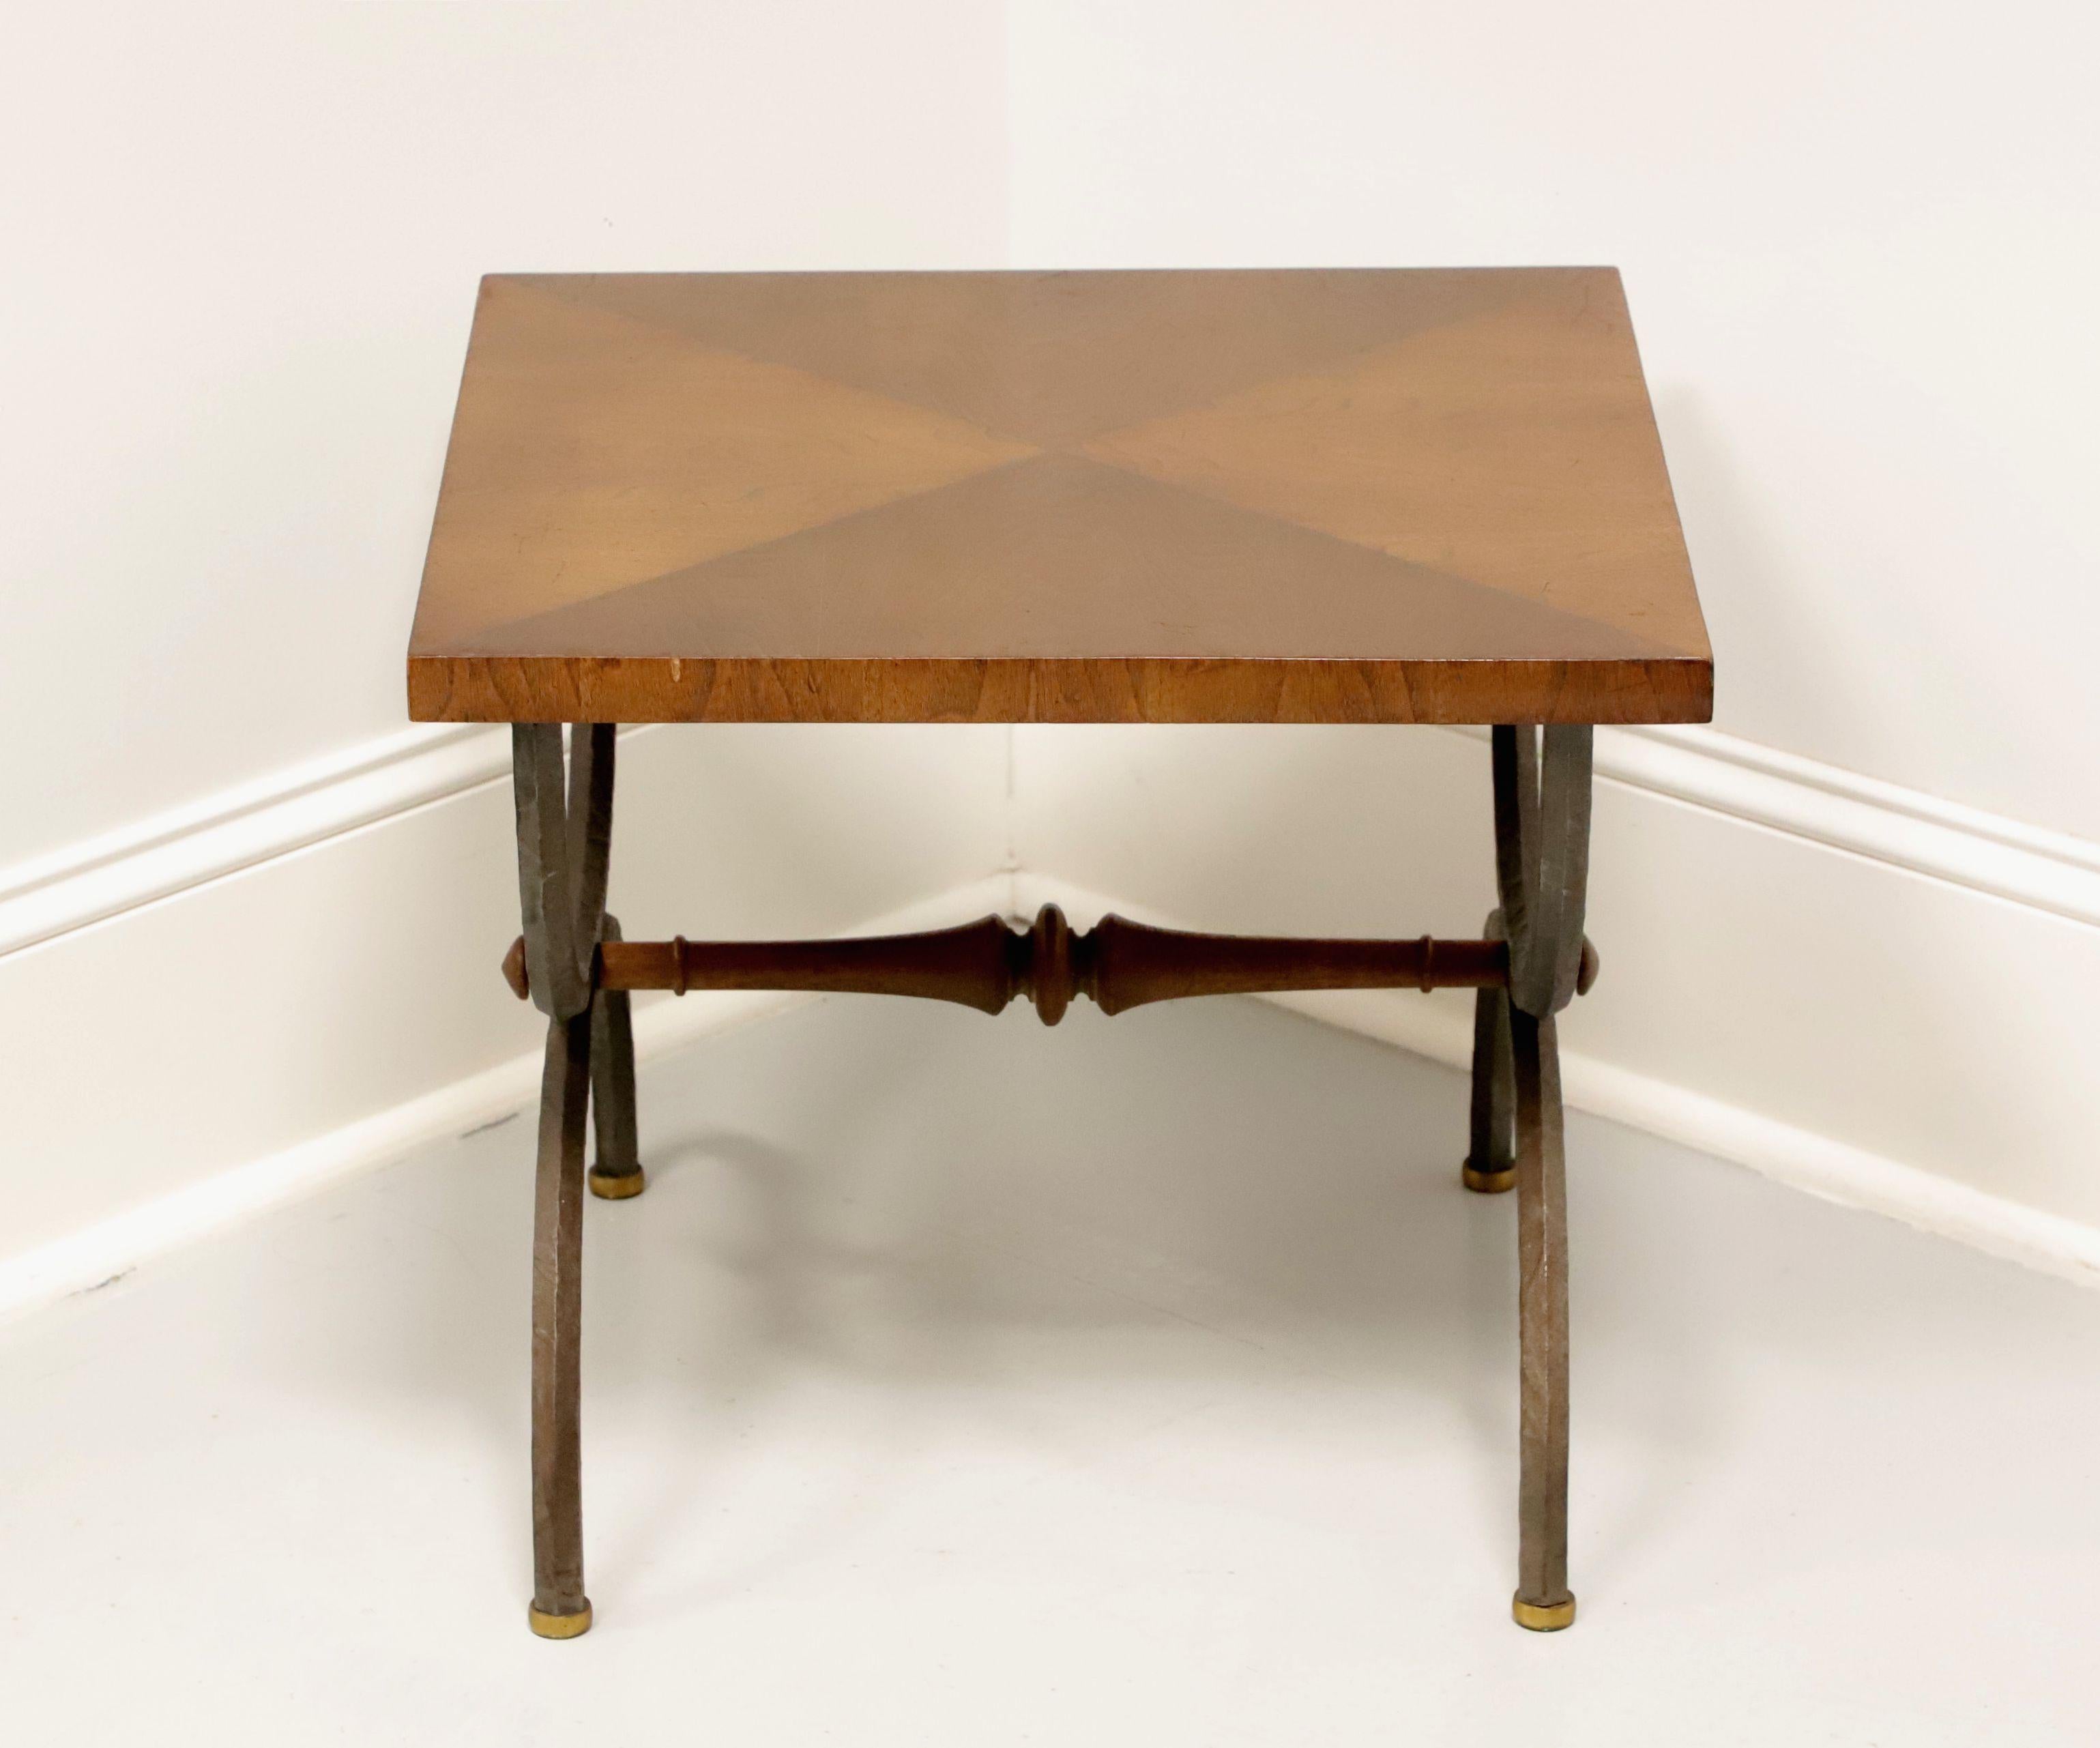 American TOMLINSON 1960's Walnut Square Cocktail Table with Metal Legs - C